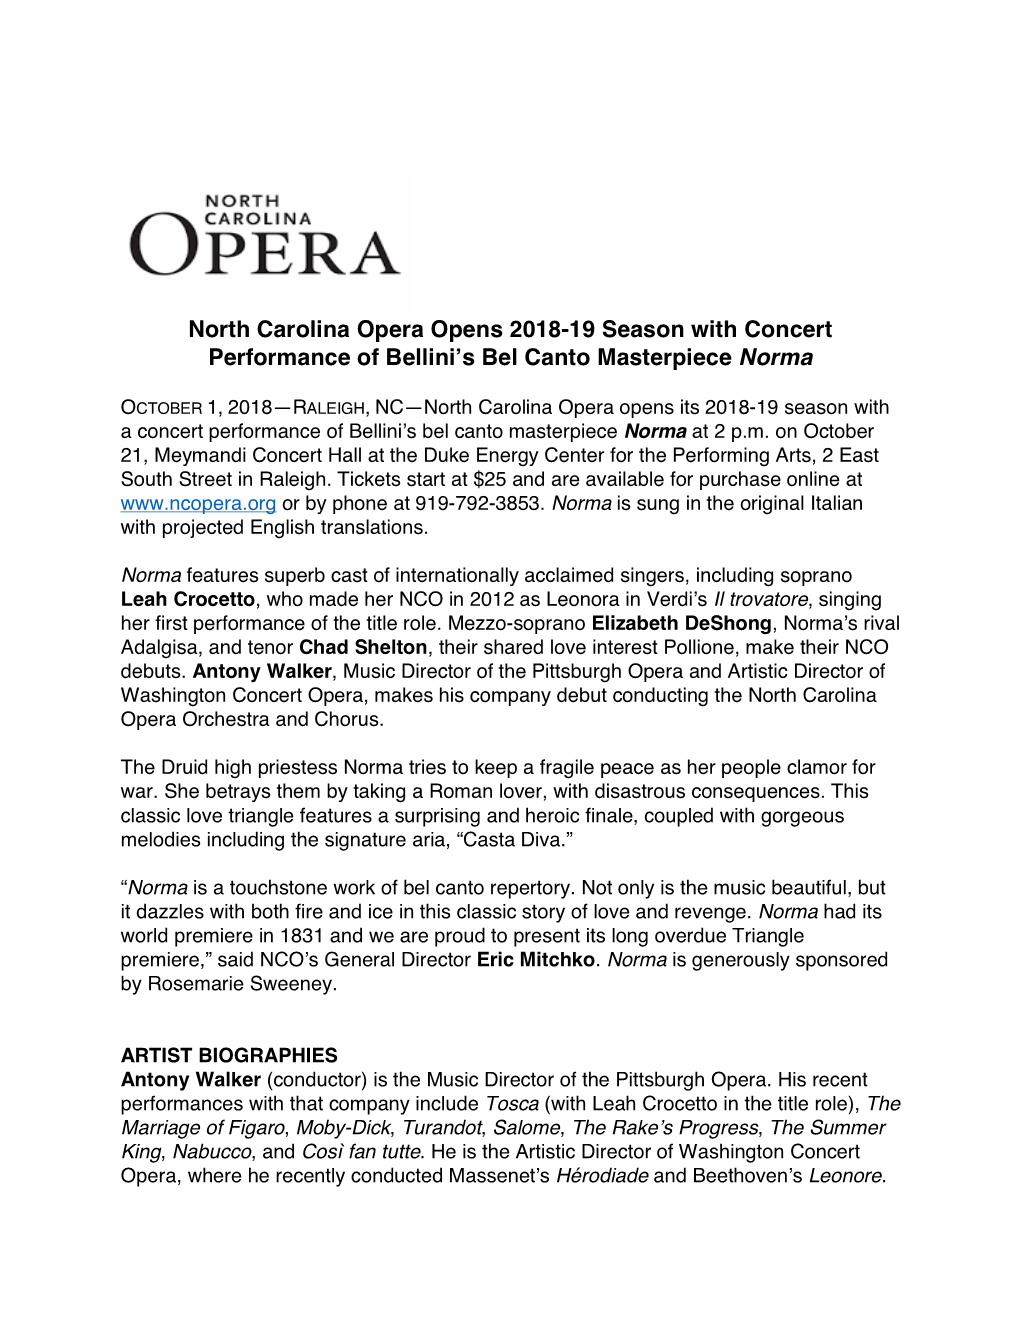 North Carolina Opera Opens 2018-19 Season with Concert Performance of Bellini’S Bel Canto Masterpiece Norma